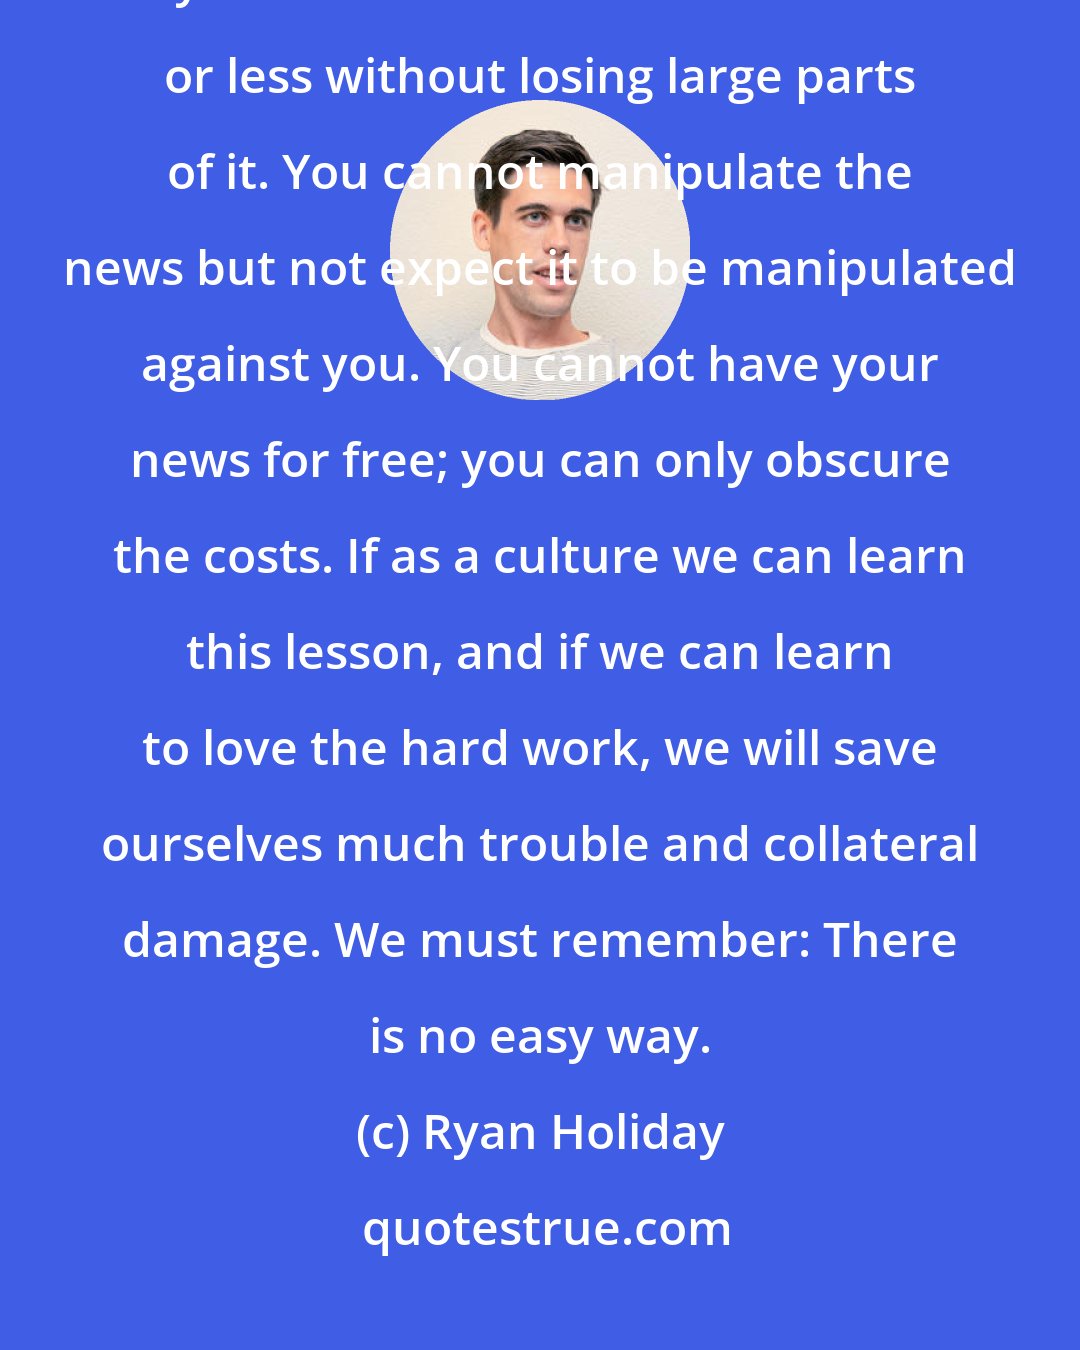 Ryan Holiday: You cannot have your news instantly and have it done well. You cannot have your news reduced to 140 characters or less without losing large parts of it. You cannot manipulate the news but not expect it to be manipulated against you. You cannot have your news for free; you can only obscure the costs. If as a culture we can learn this lesson, and if we can learn to love the hard work, we will save ourselves much trouble and collateral damage. We must remember: There is no easy way.